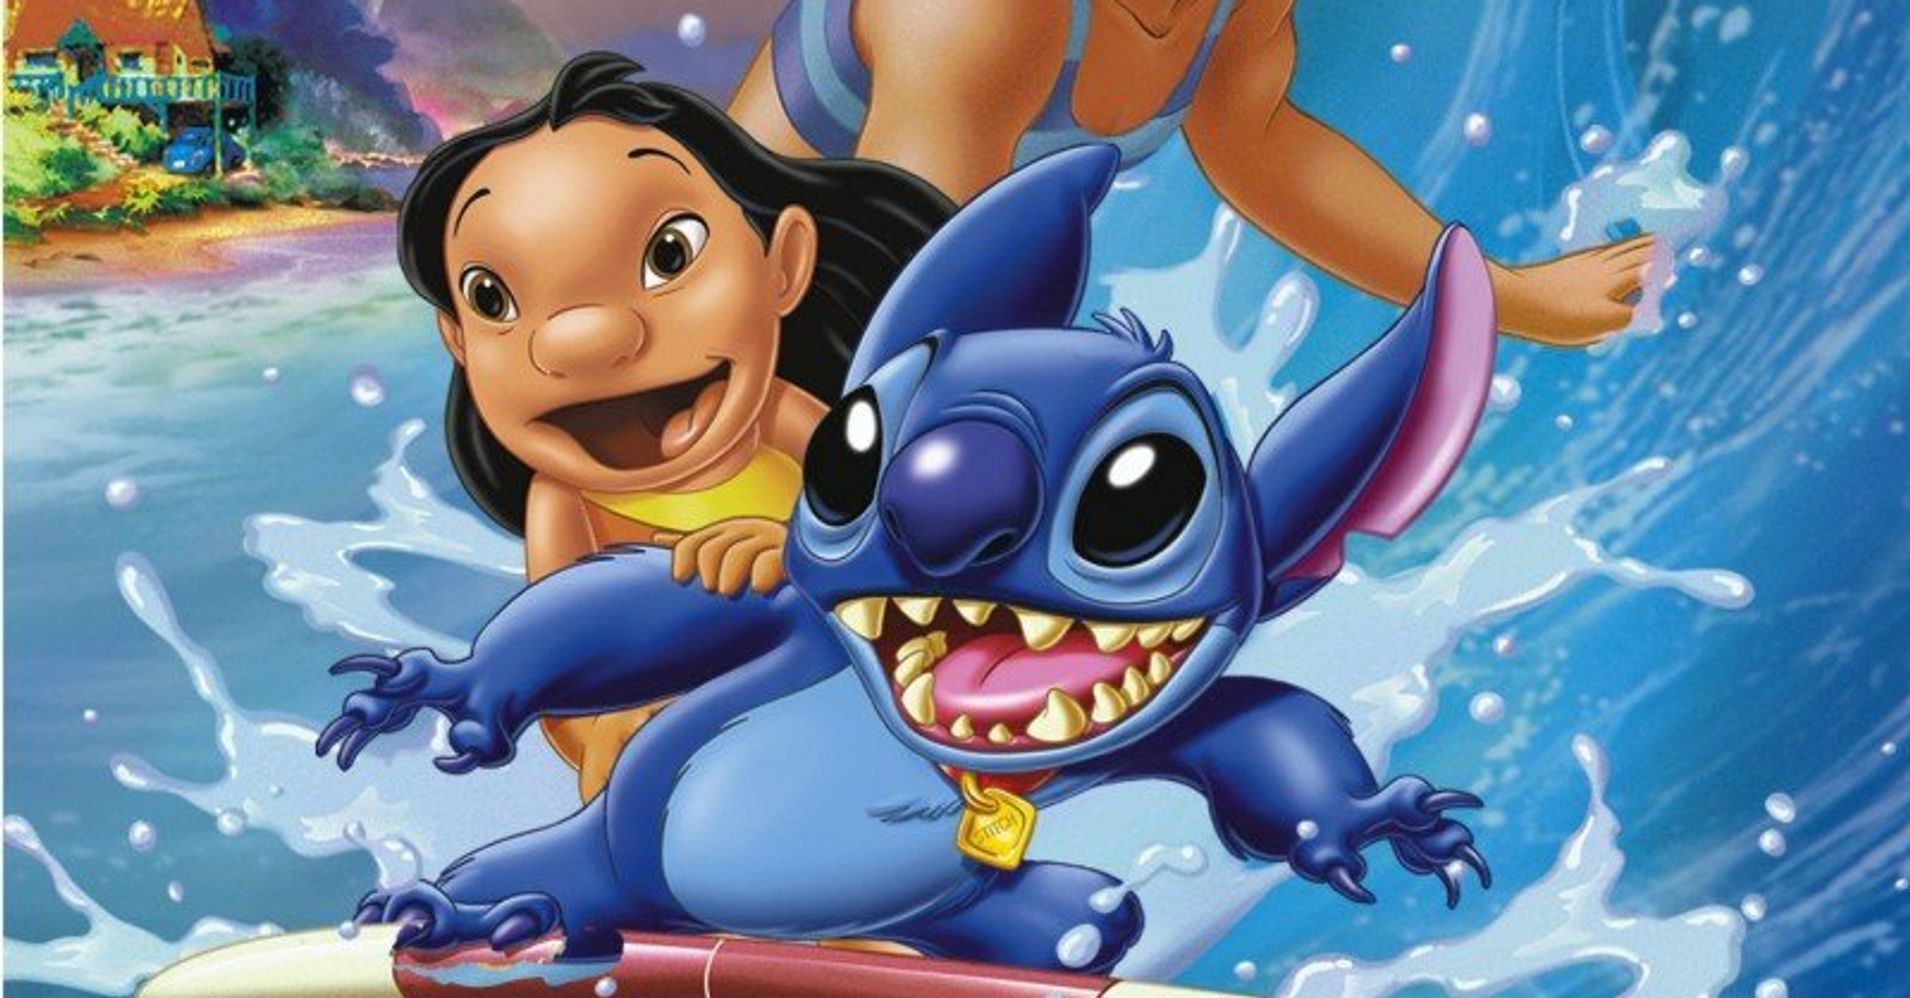 This Disney Movie Looked Very Different Before 9/11 | HuffPost